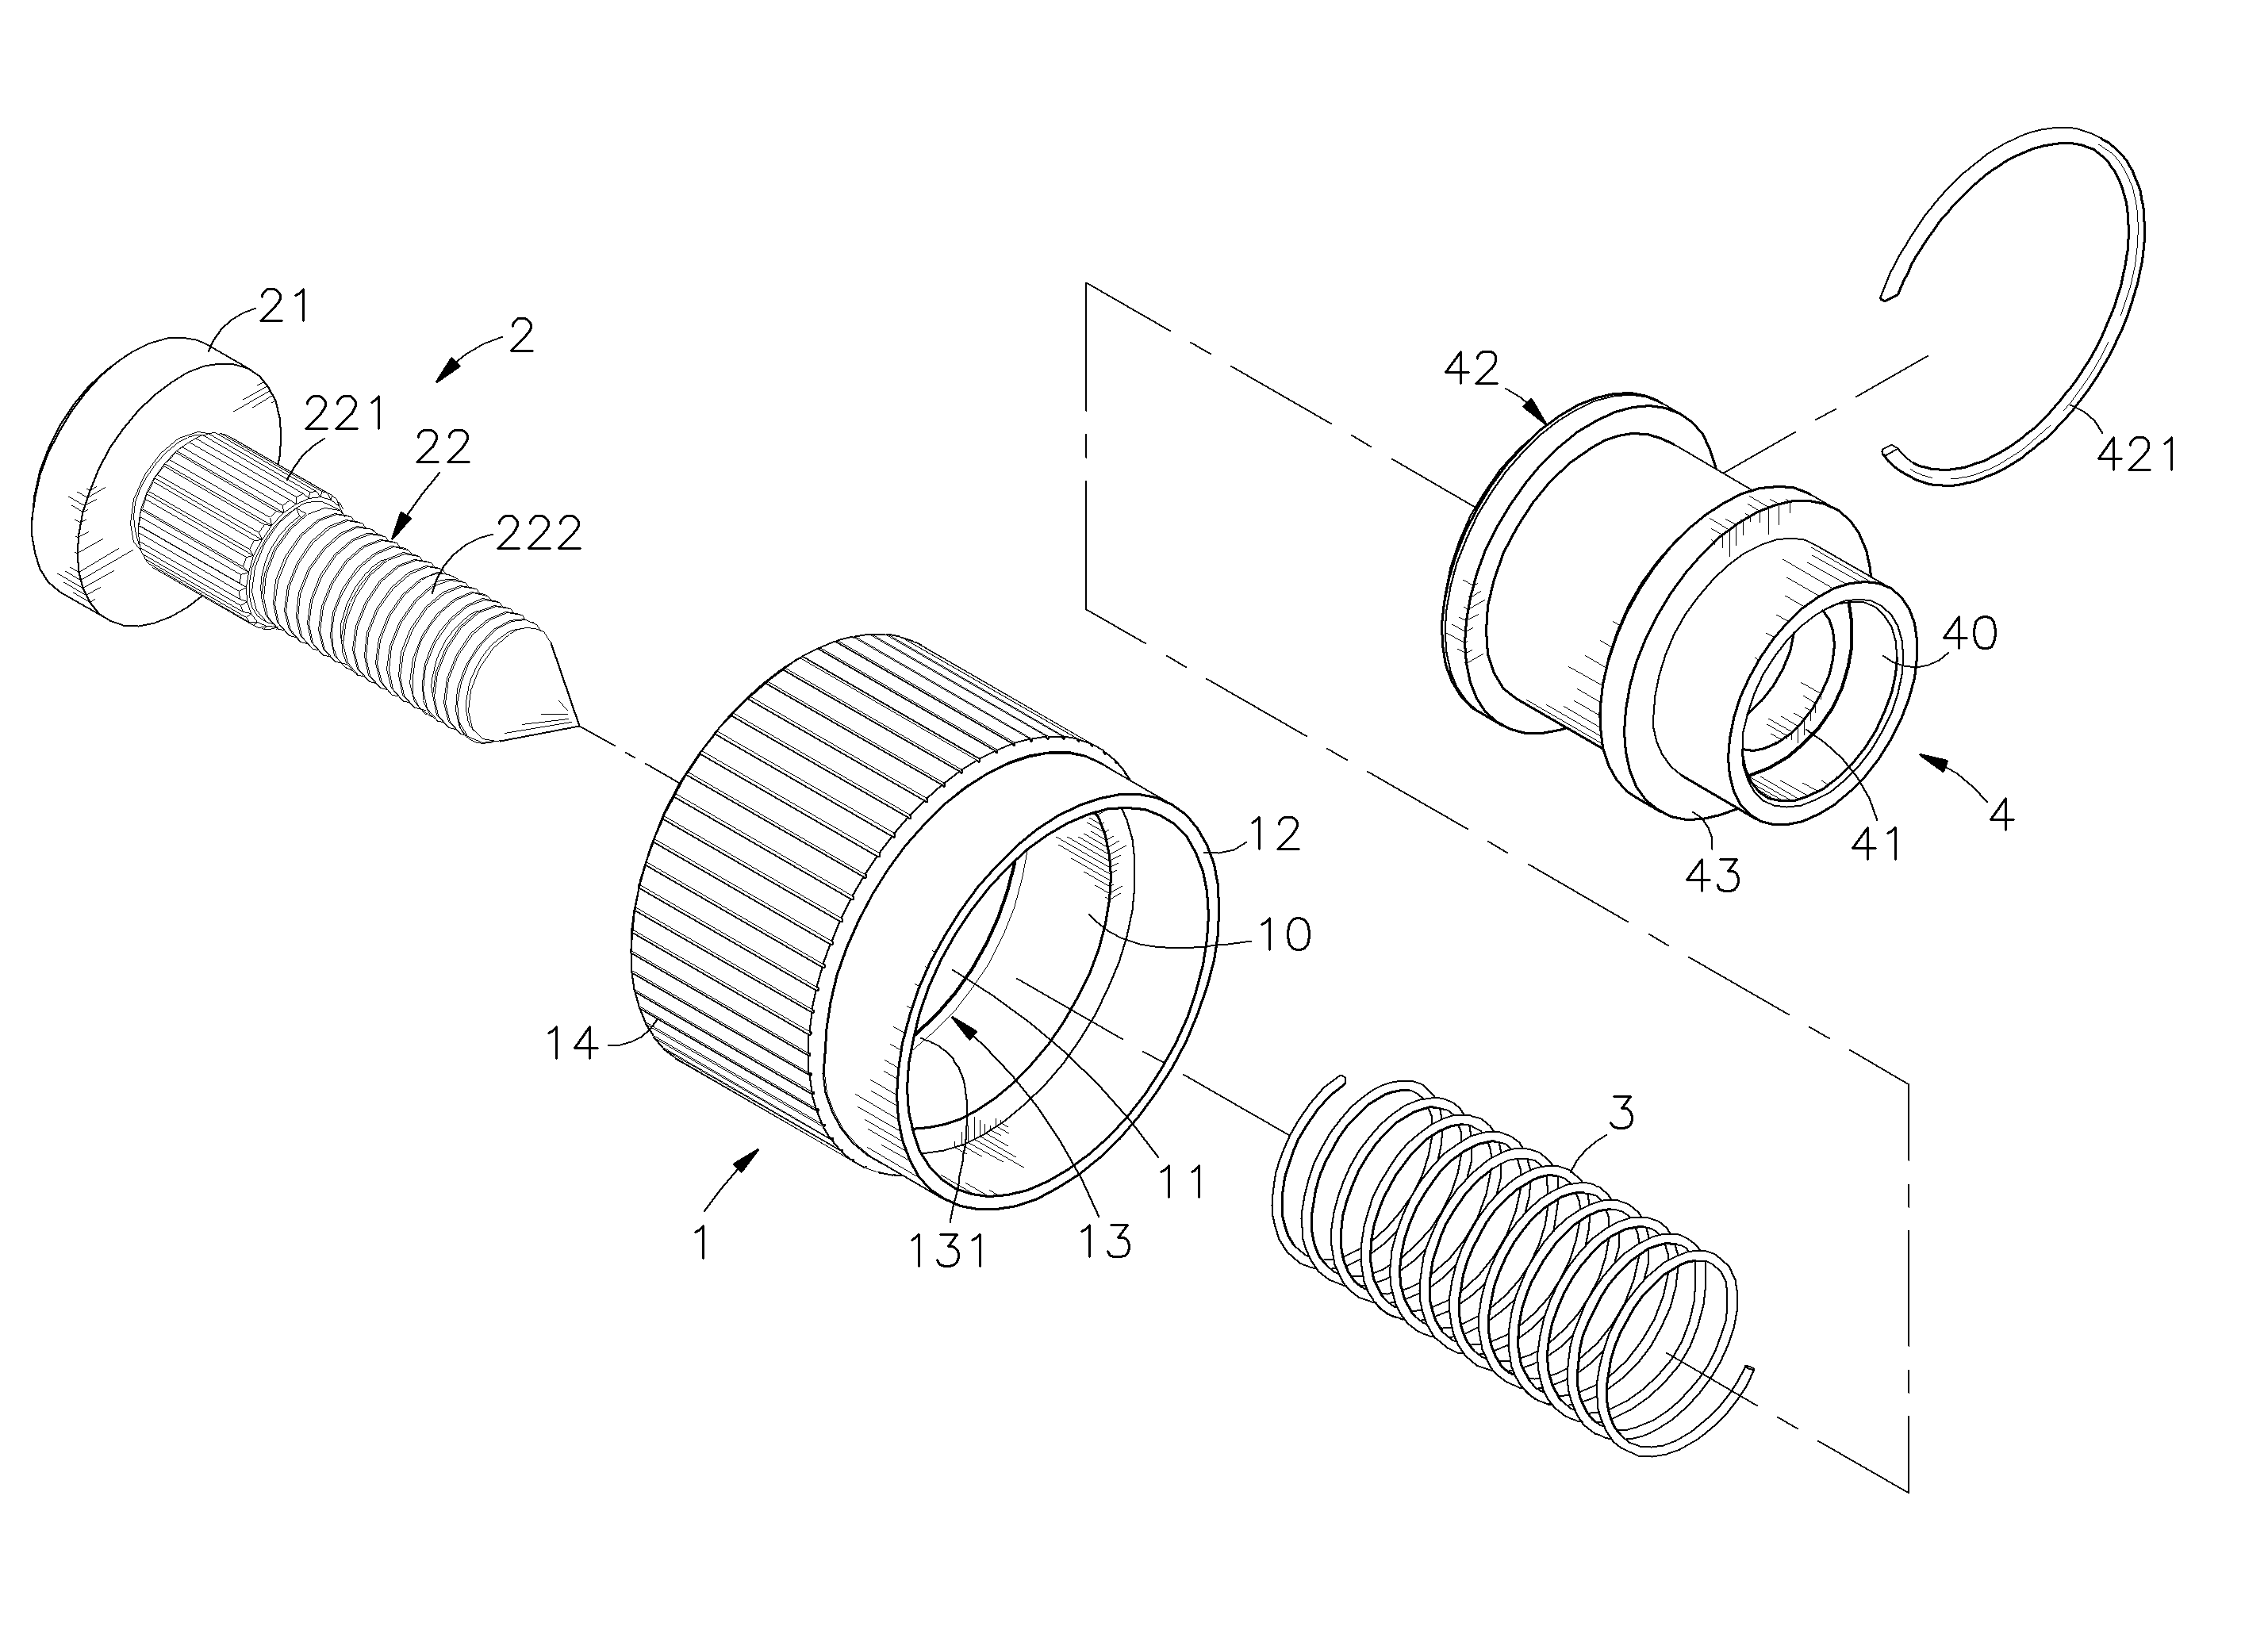 Quick-positioning screw assembly